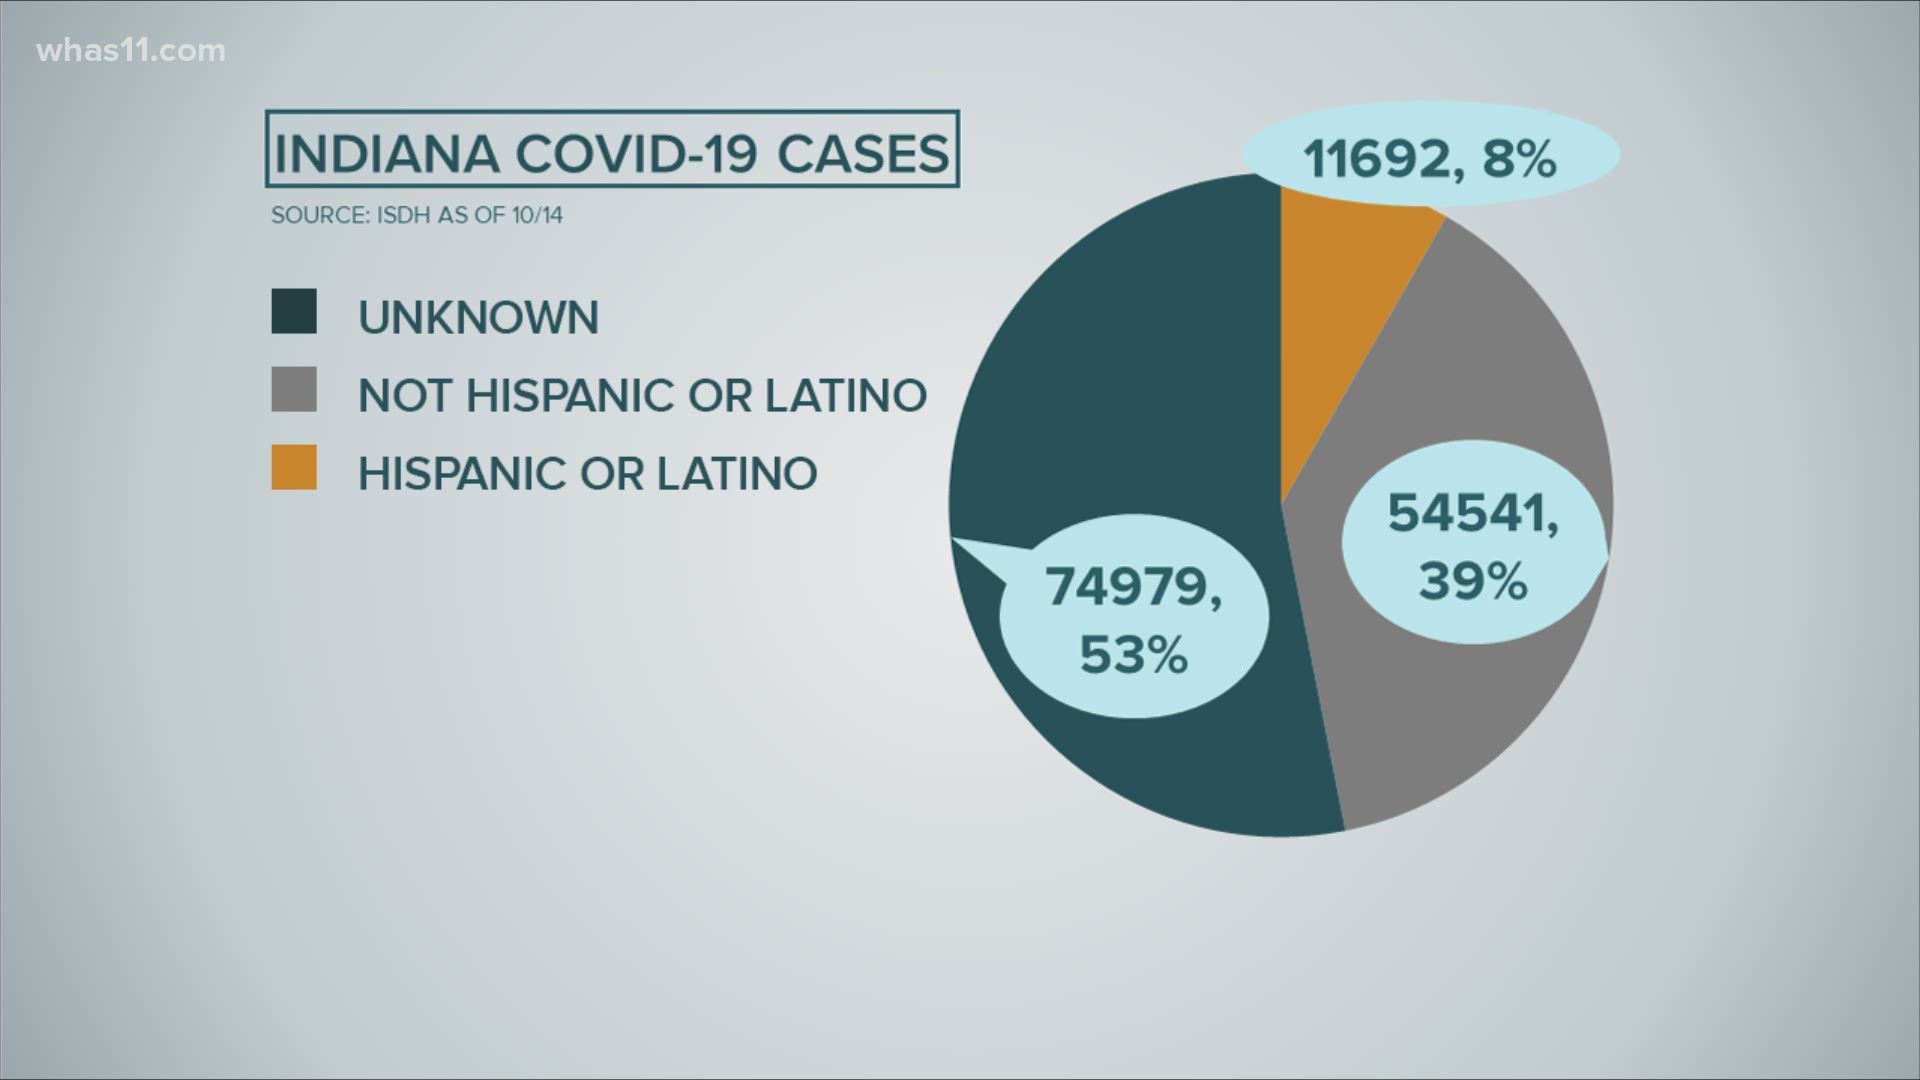 The Hispanic and Latino communities are disproportionately impacted by the pandemic, highlighting the larger healthcare disparity.